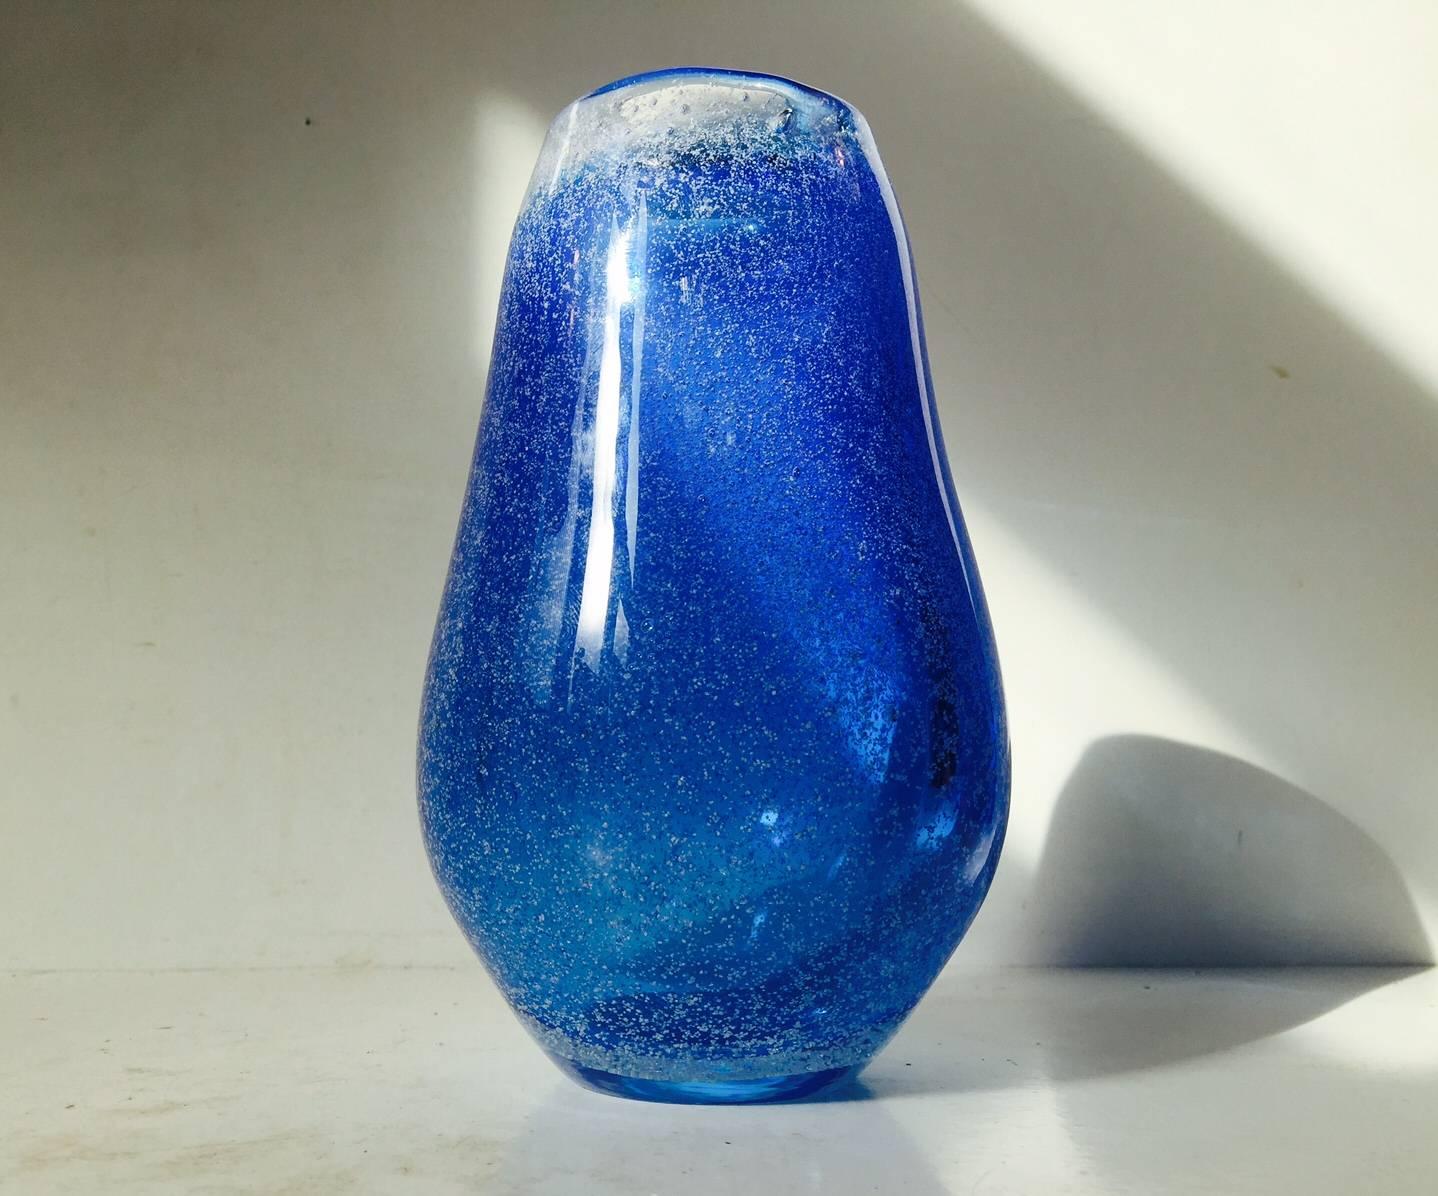 This cloudy blue galaxy art glass vase was designed by Bertil Vallien. It’s manufactured during the 1970s by Kosta Boda, Sweden. The cloudy spotted galaxy-like effect is created with air and white ash. Measures: Height 18.5 cm (7.3 inches), weight